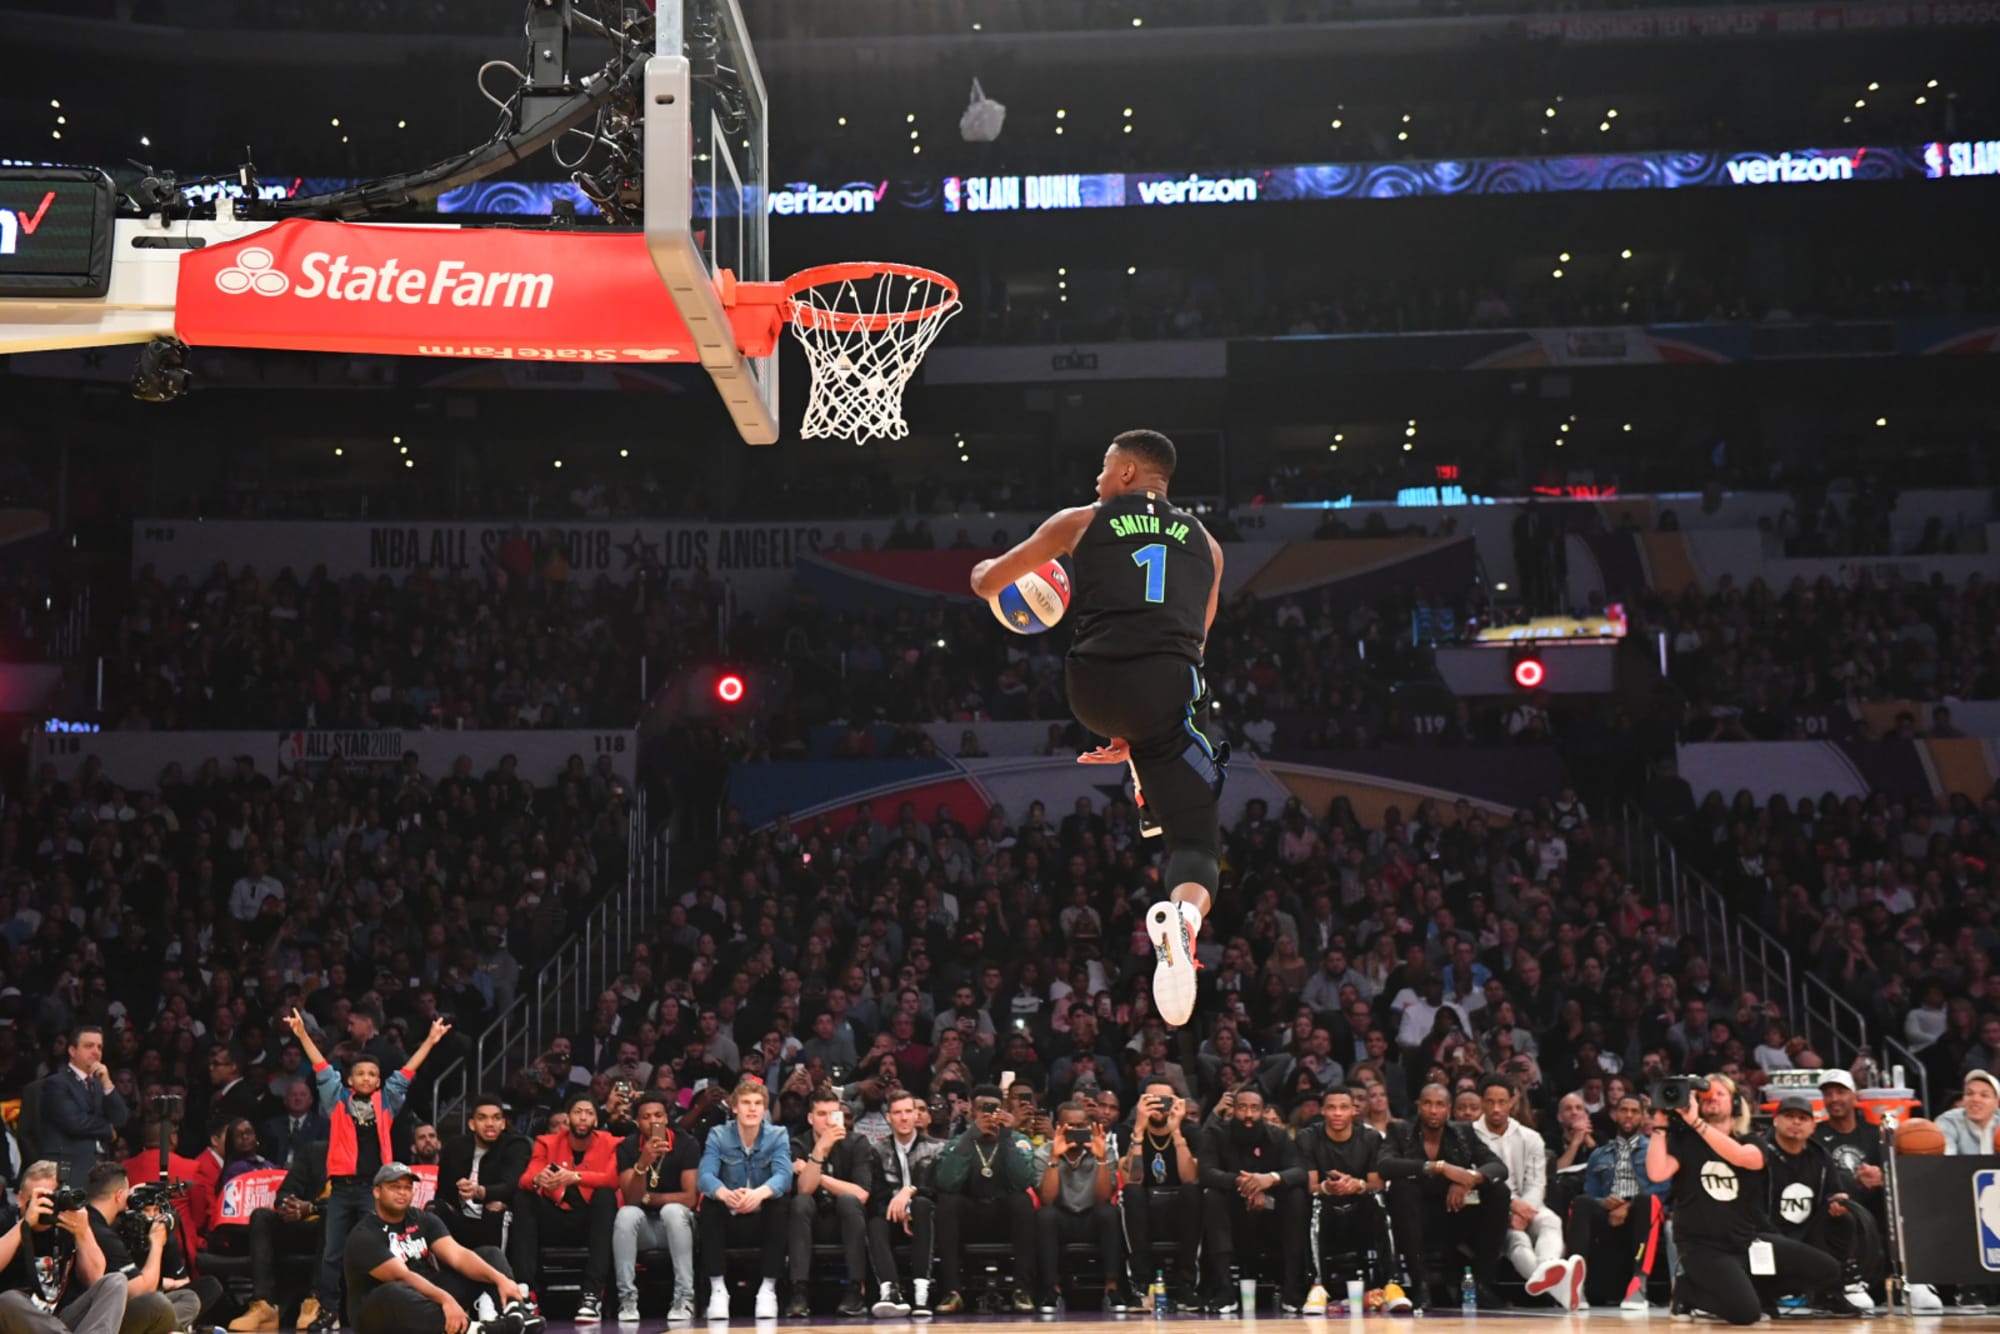 Ranking the 5 events of 2019 NBA AllStar Weekend